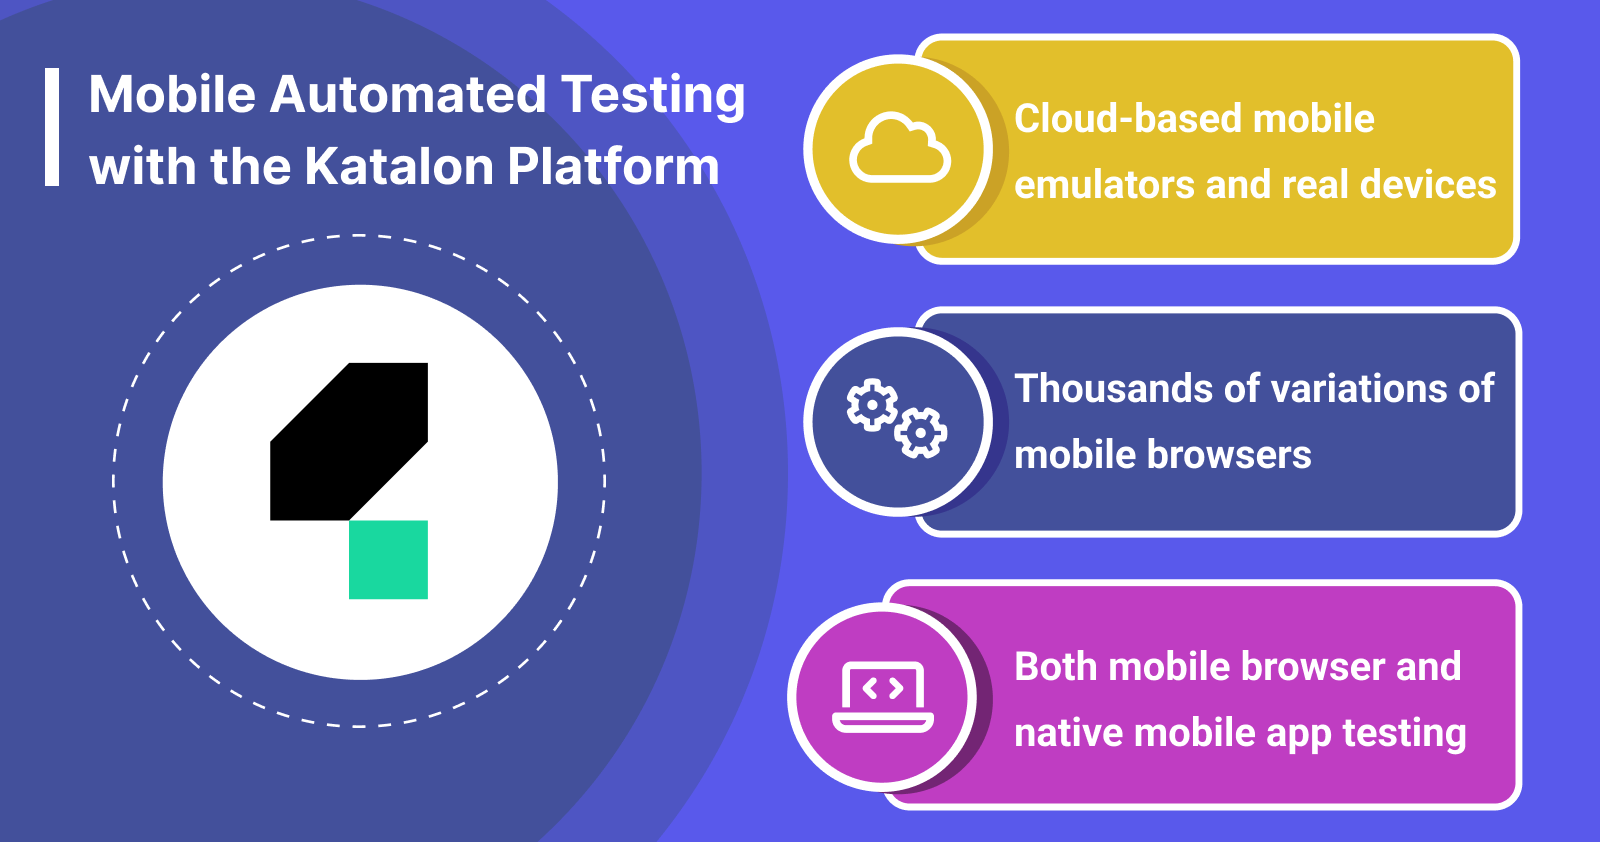 Digital mobile application strategies - Mobile automated testing with the Katalon Platform | Cloud-based test environments, mobile browser app testing, native mobile app testing